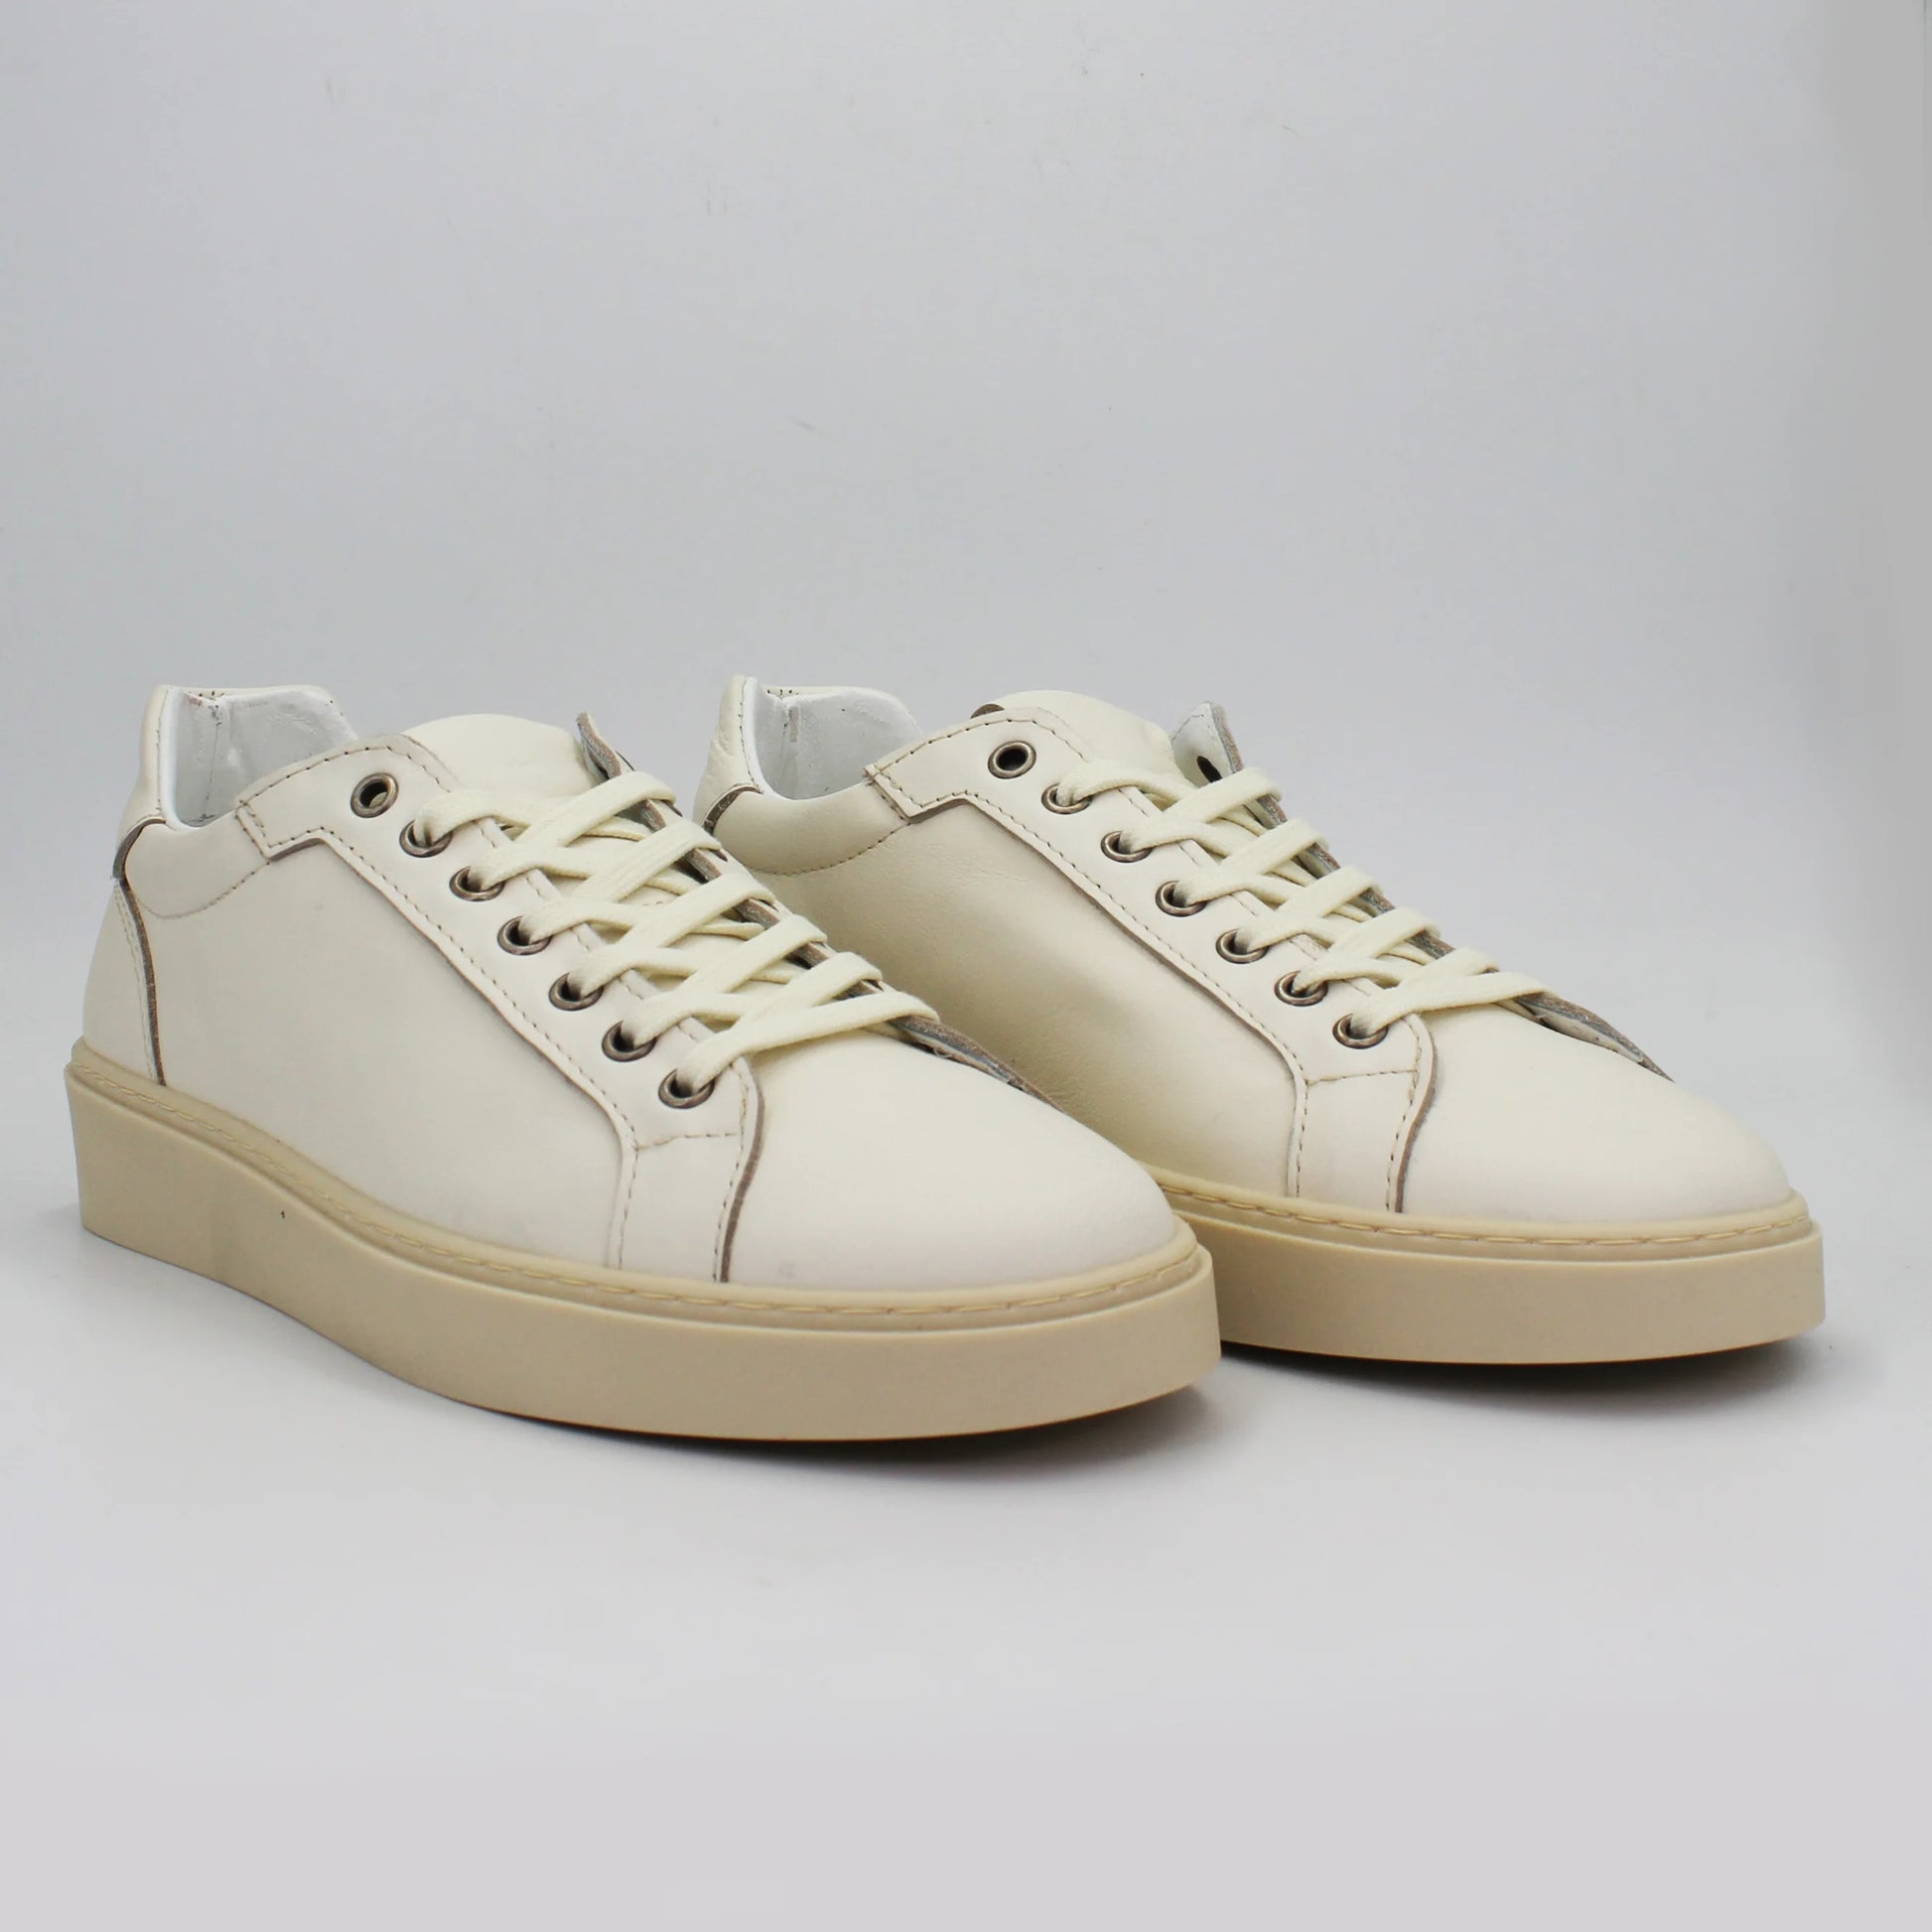 Shop Handmade Italian Leather Sneaker in Beige (COR1068) or browse our range of hand-made Italian shoes for men in leather or suede in-store at Aliverti Cape Town, or shop online. We deliver in South Africa & offer multiple payment plans as well as accept multiple safe & secure payment methods.